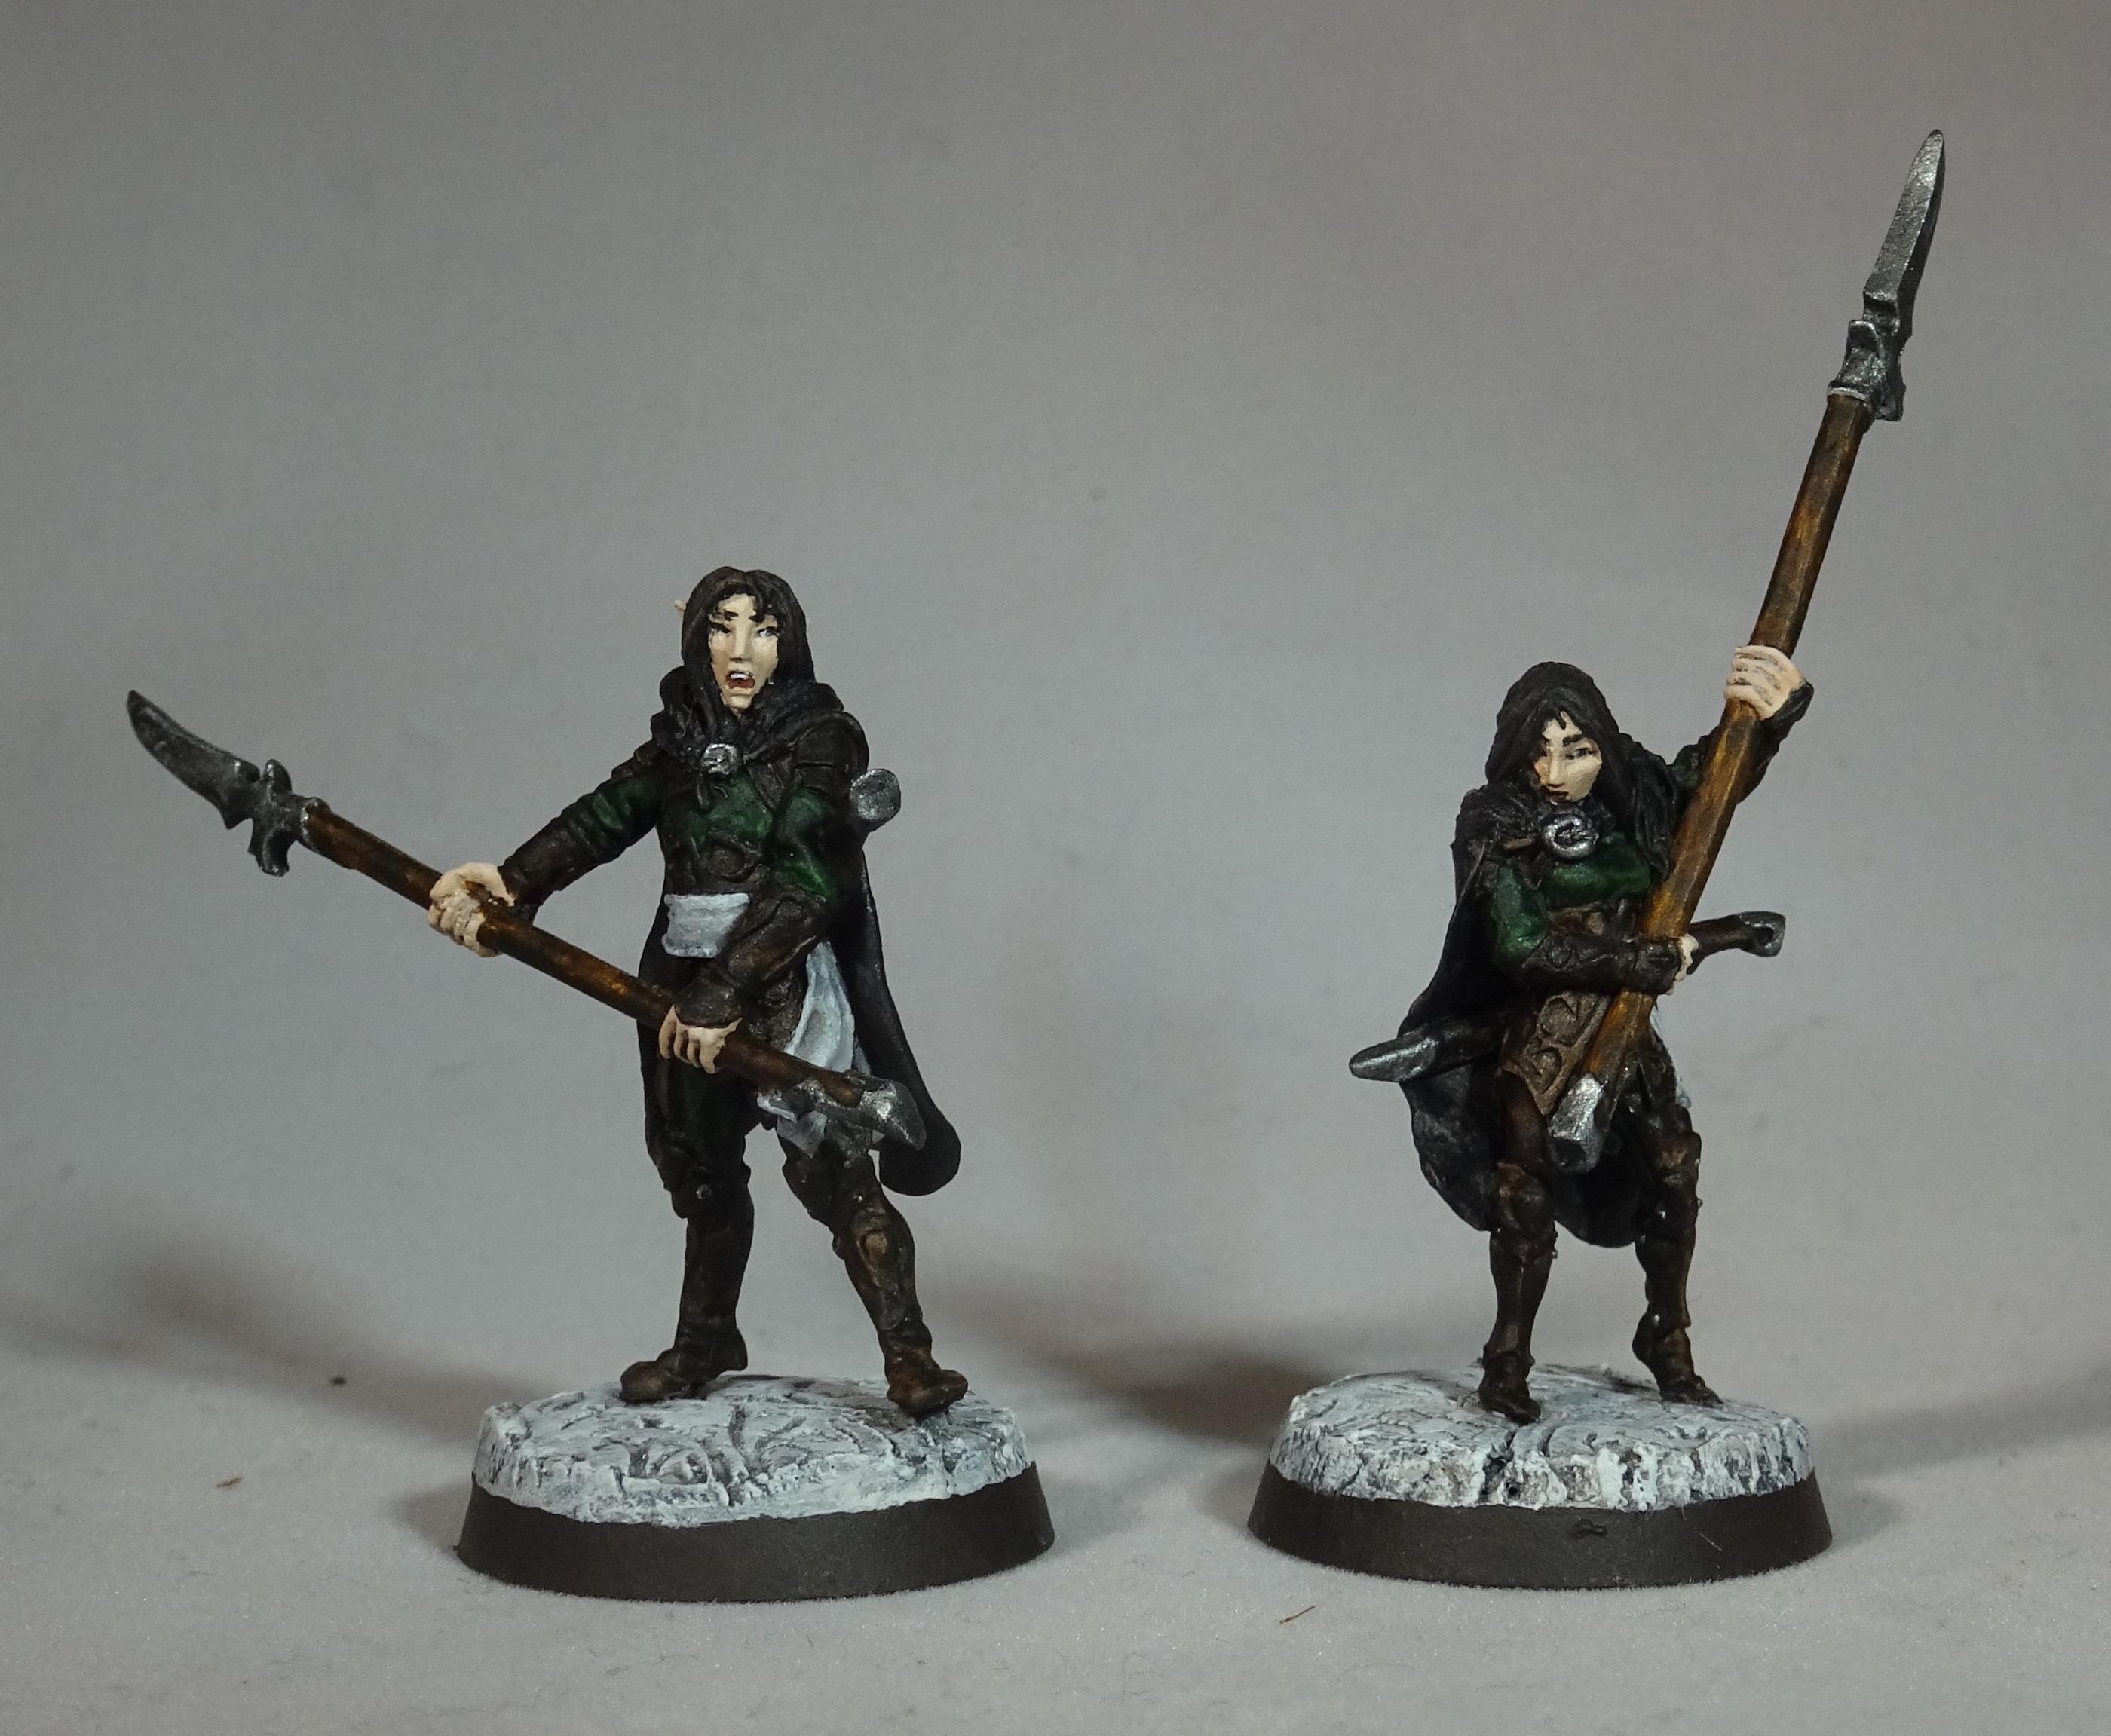 Elves with spears